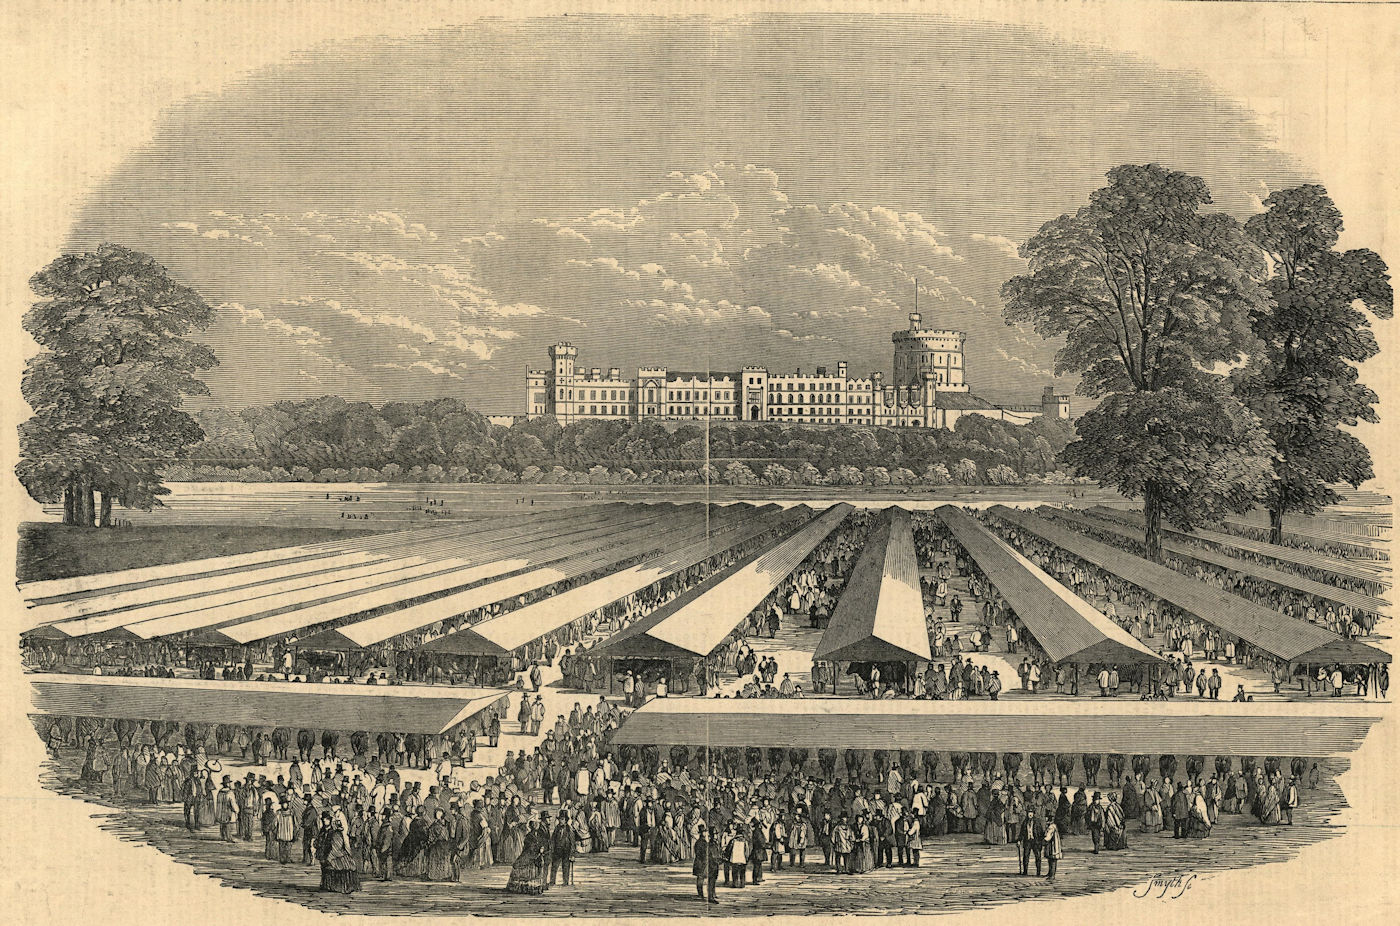 Associate Product Royal Agricultural Society's meeting at Windsor. Home Park. Castle 1851